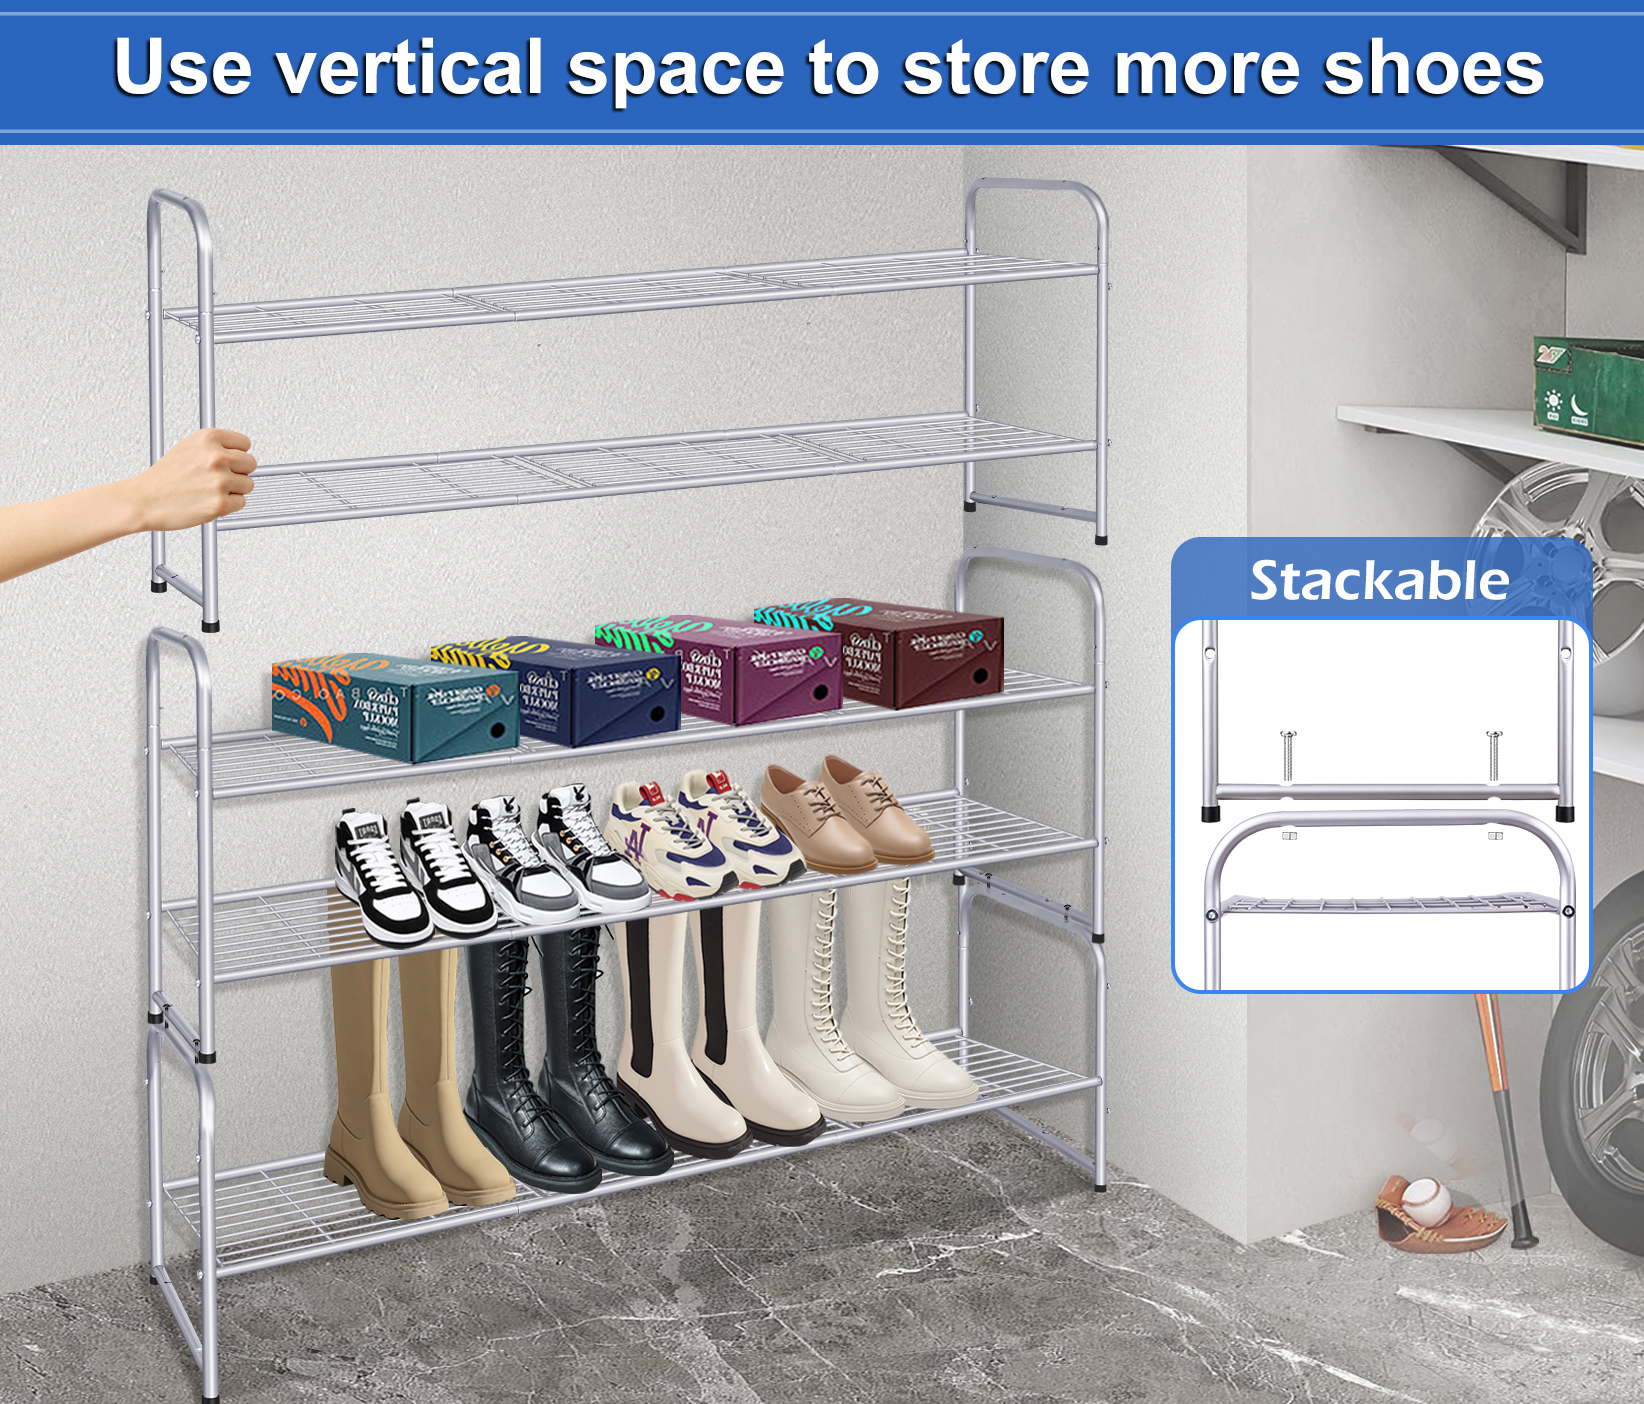 KEETDY Hanging Shoe Organizer to Store 10 Pairs Shoes 5- Shelf Shoe Rack  for Closet for Small Space Storage Bedroom, Dorm, Grey